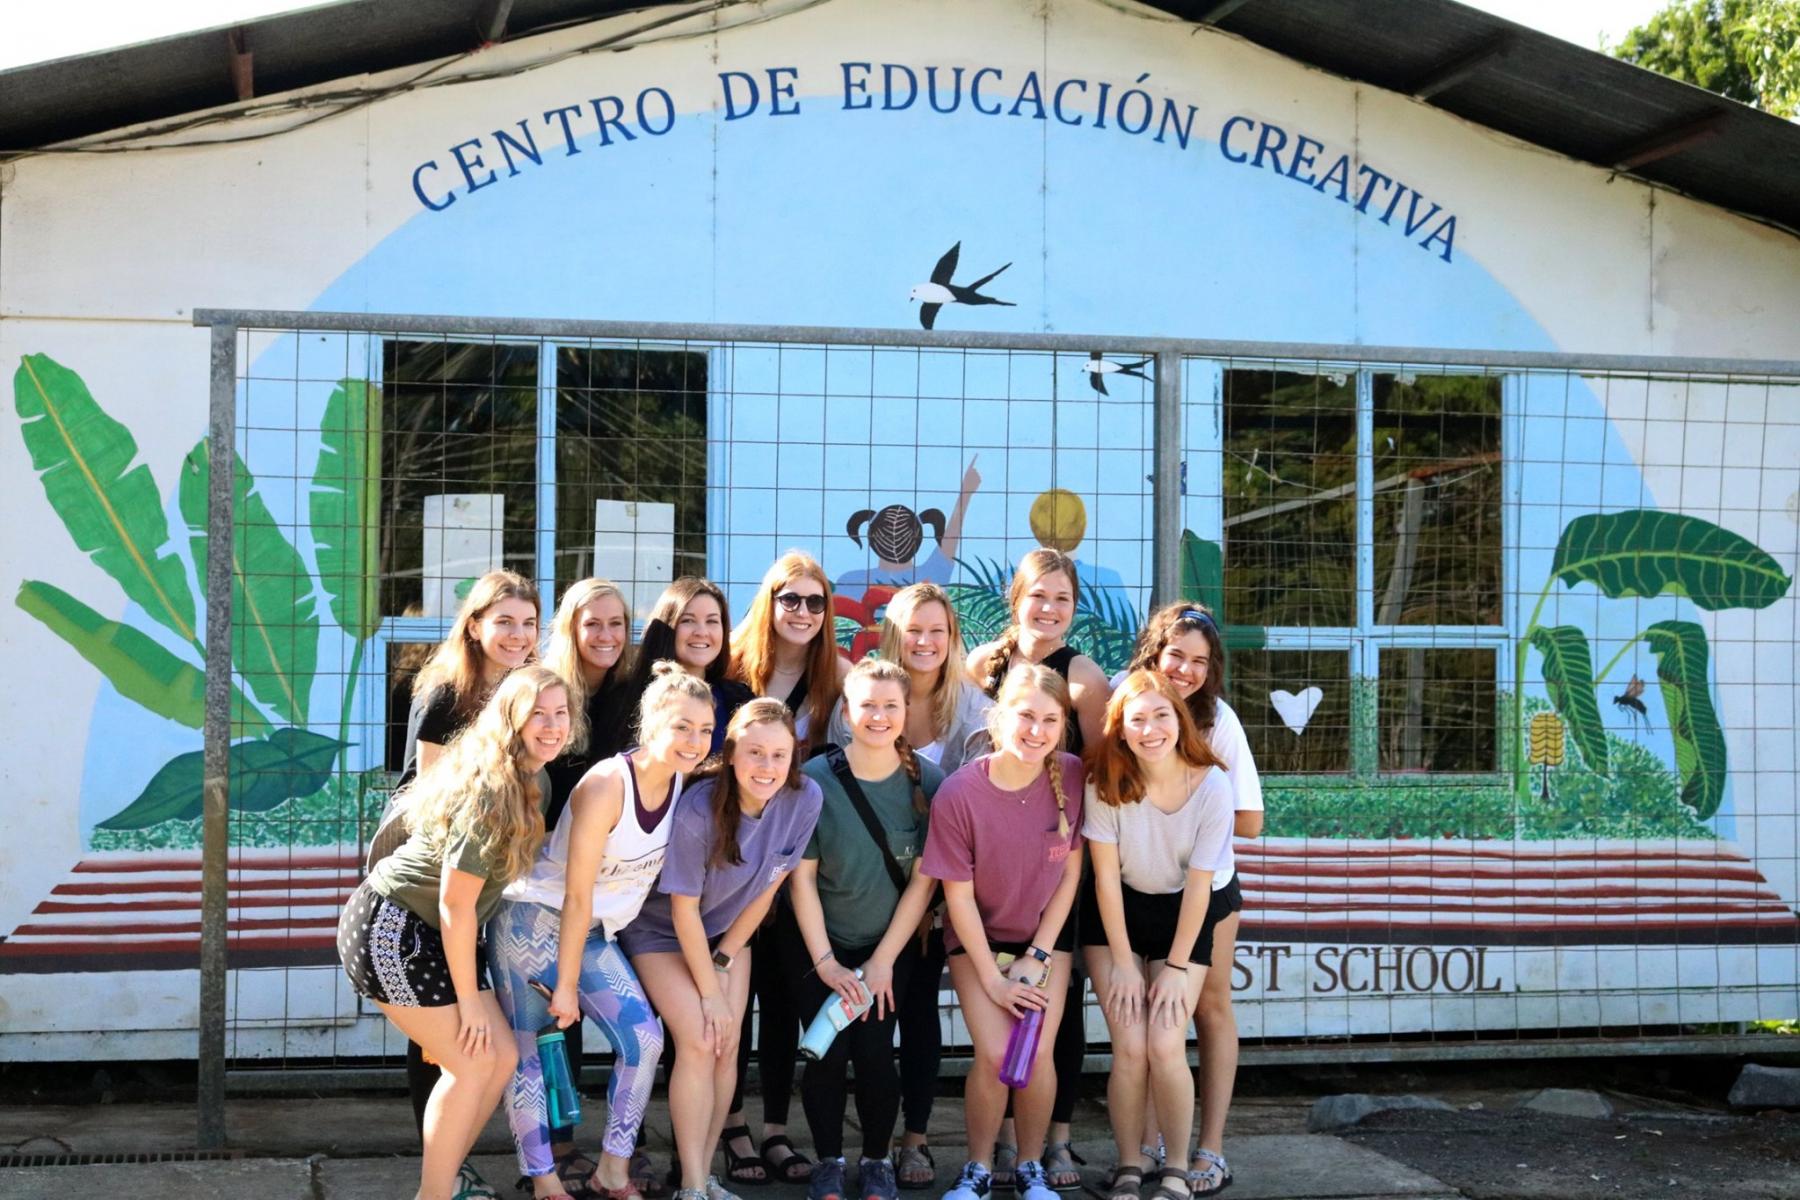 Students smiling outside of school in Costa Rica.